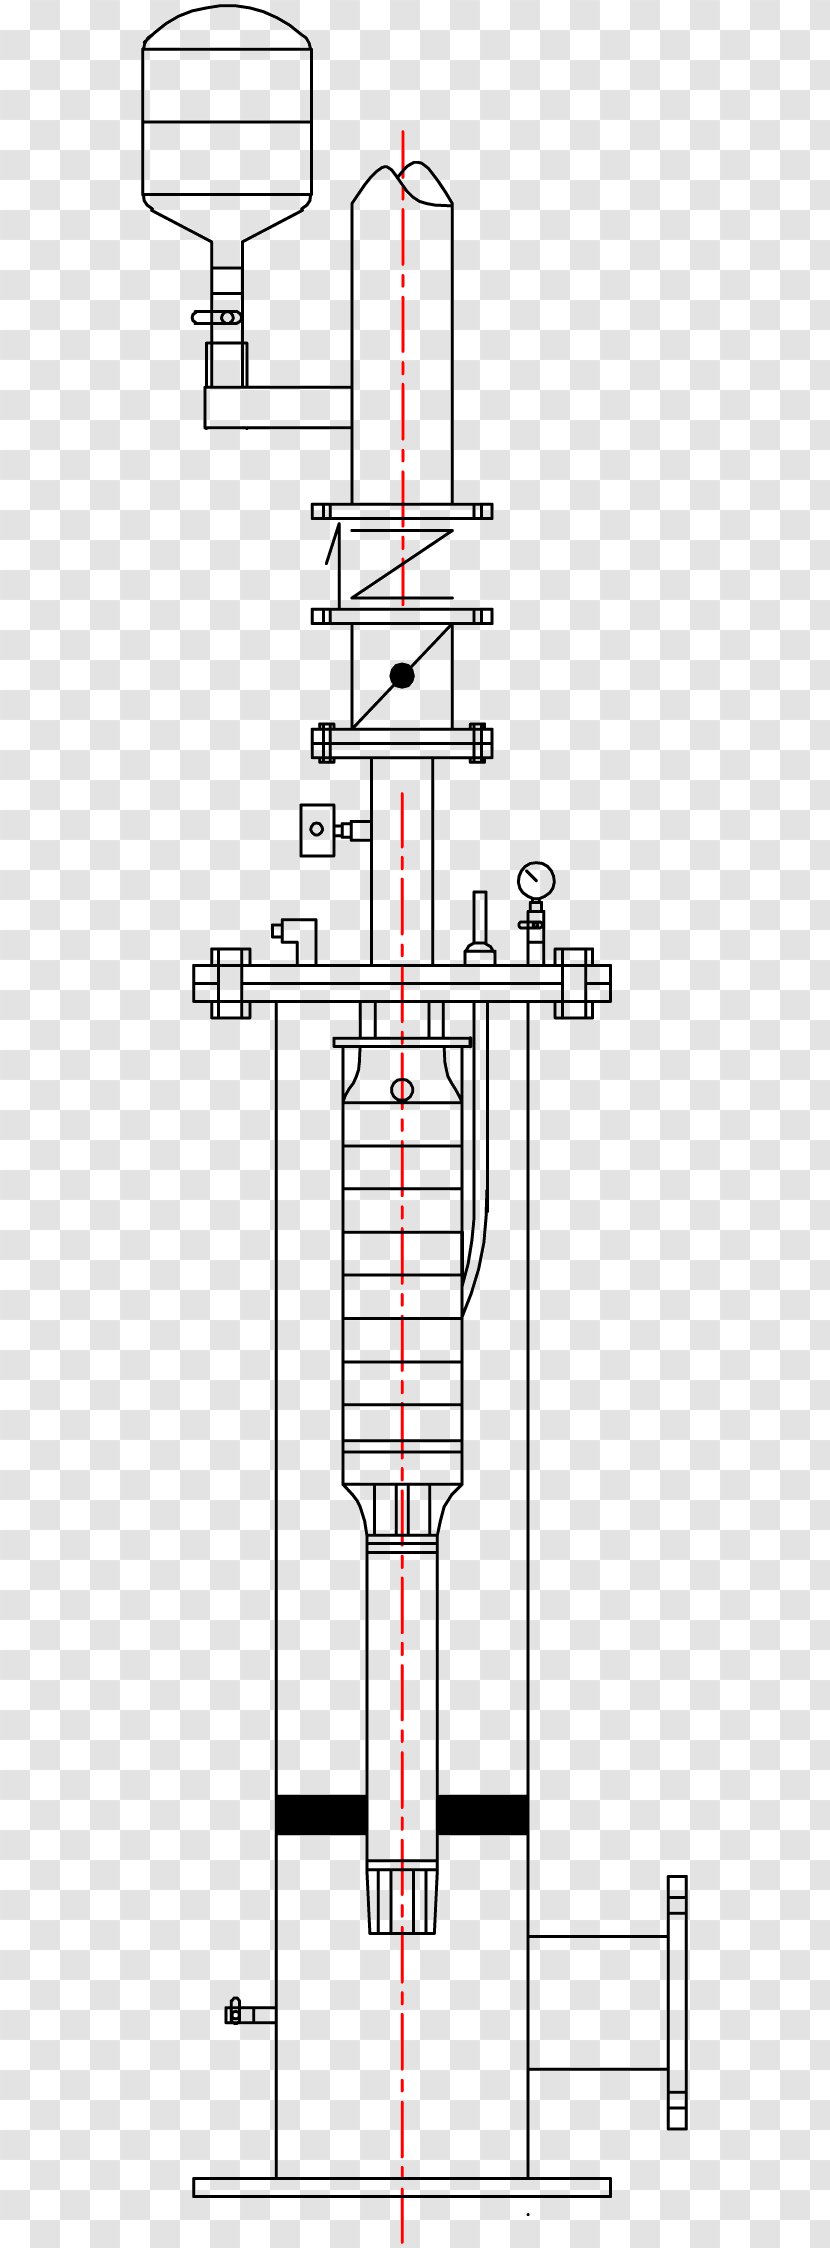 Submersible Pump Hardware Pumps .dwg Computer-aided Design Technical Drawing - Water - Max Steel Transparent PNG